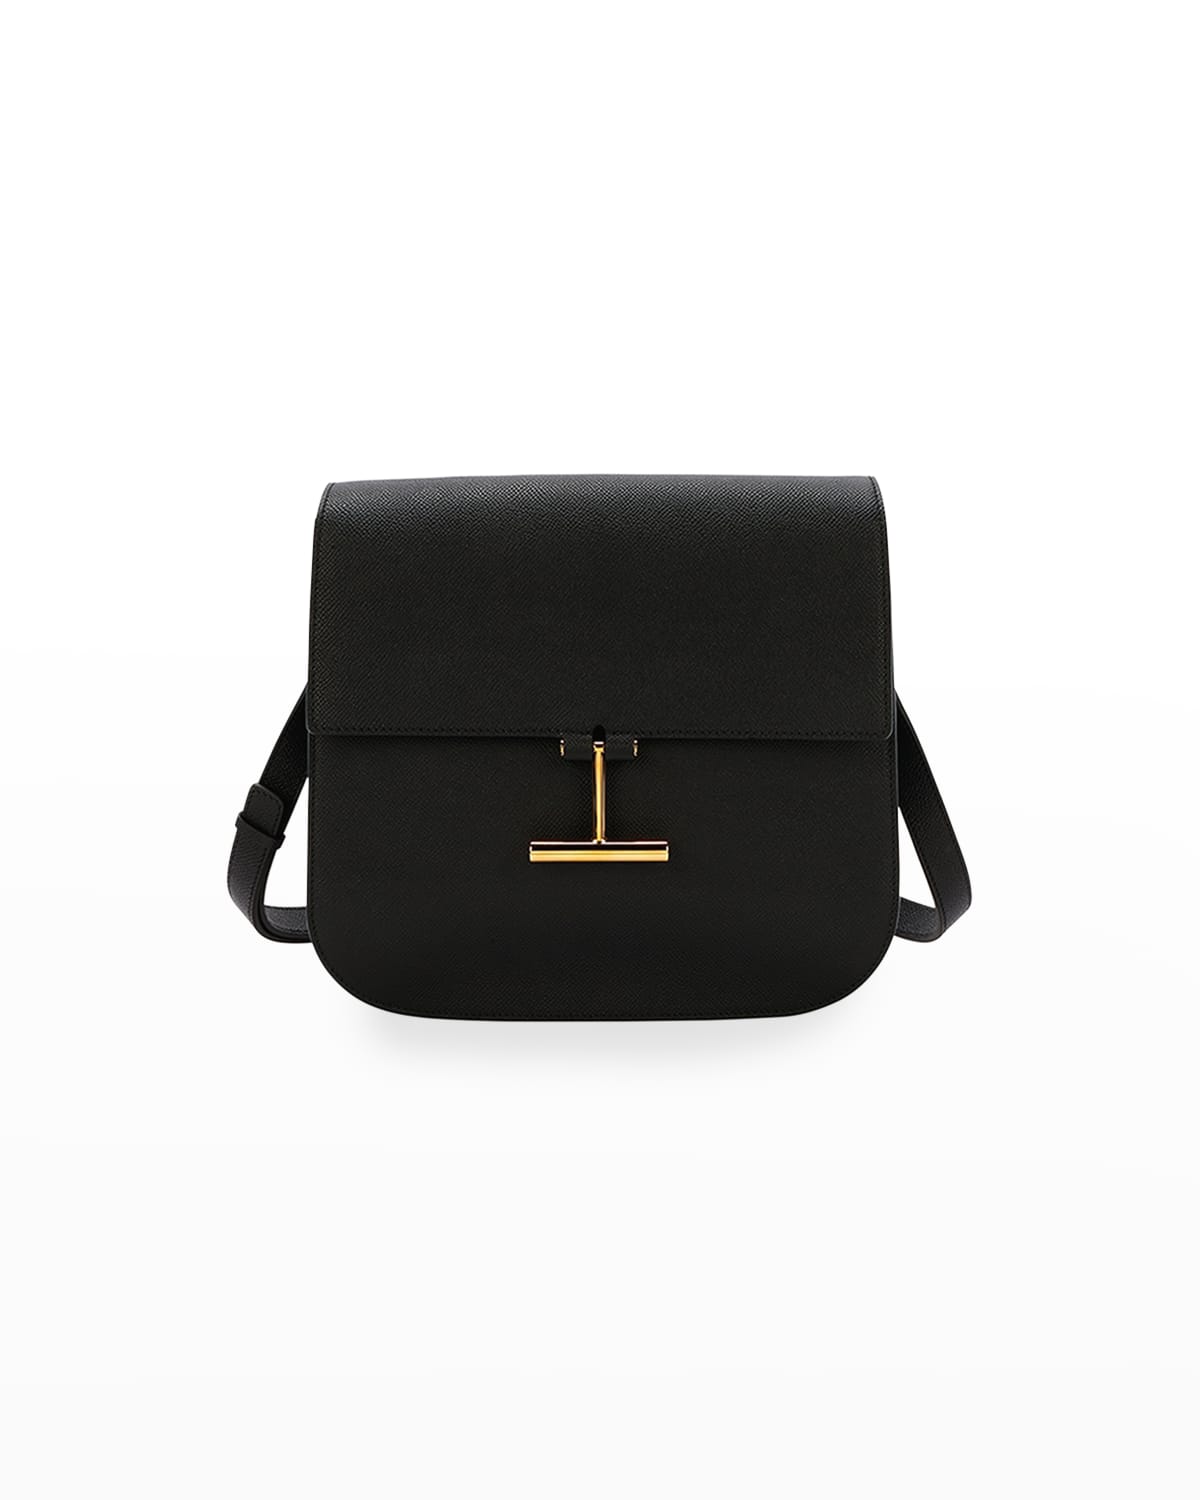 Tom Ford Tara Mini Crossbosy In Grained Leather With Leather Strap In Black